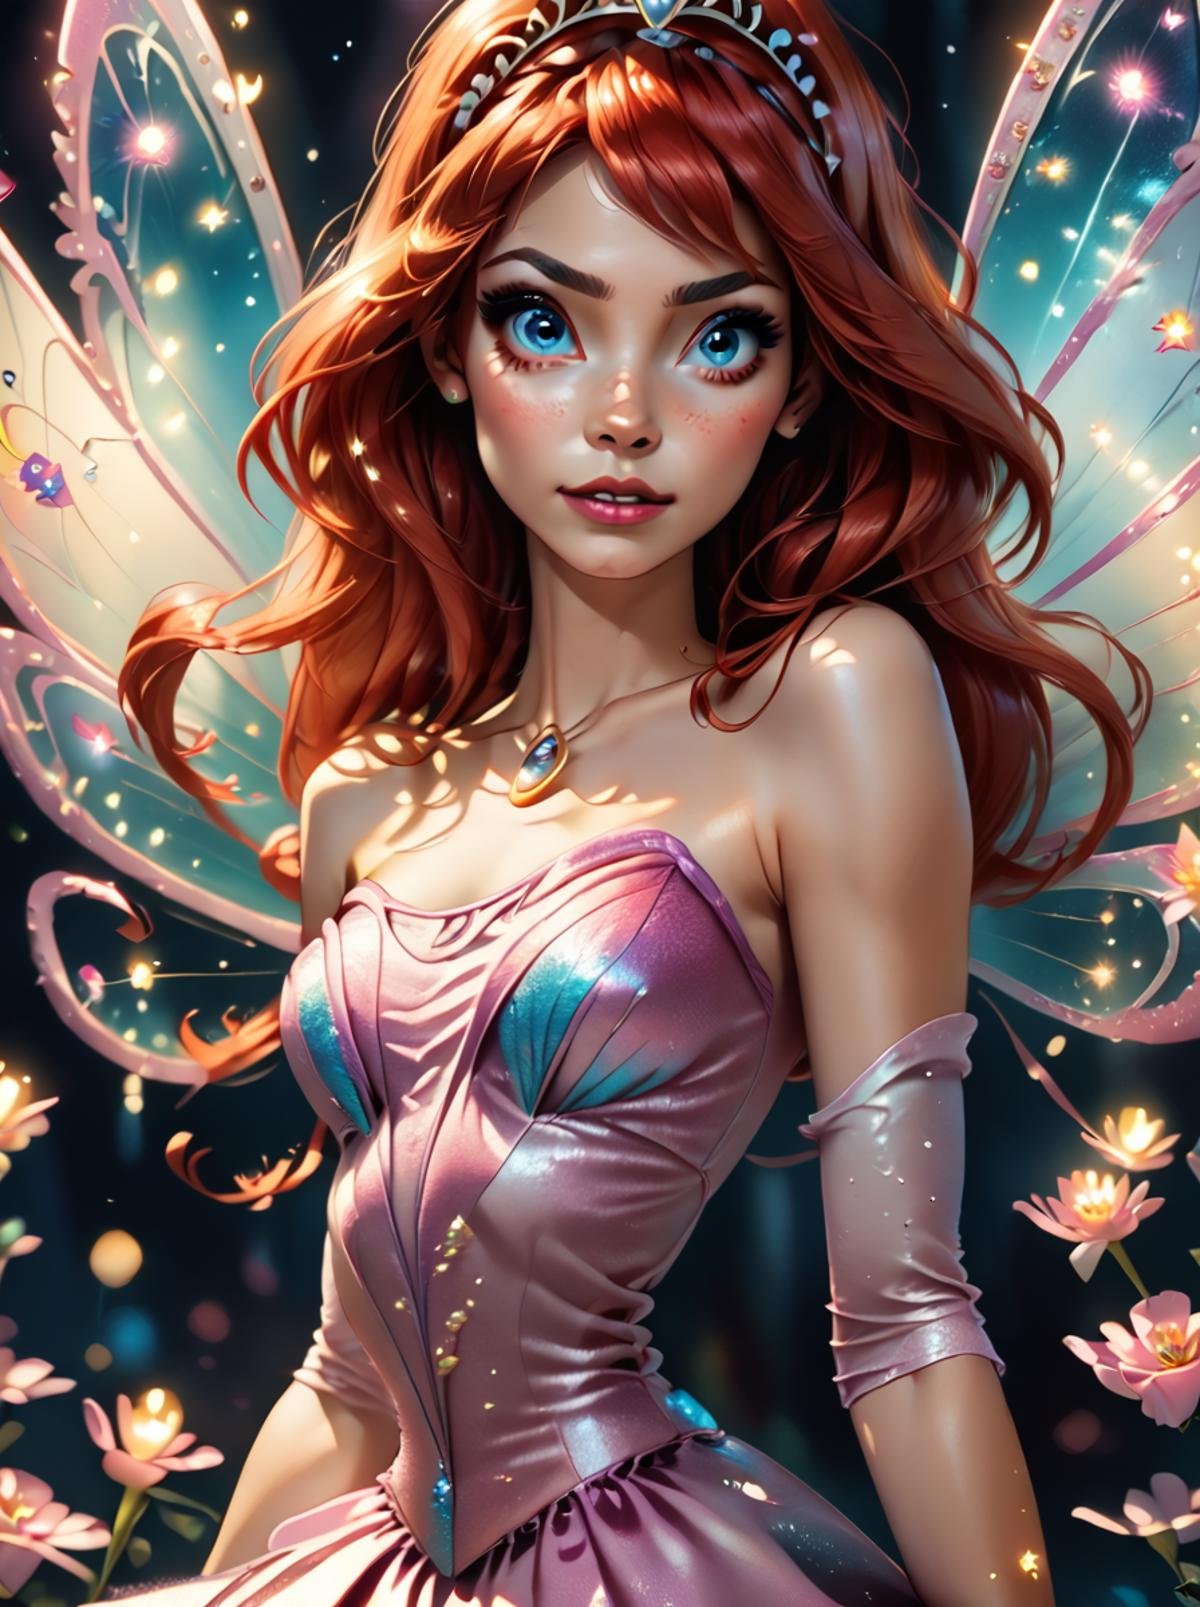 score_9, score_8_up, score_7_up, <lora:WinxAndTrixPony:0.8>,winxtrix,1 girl, solo, long red hair, blue eyes, wearing a sparkling blue and pink fairy dress,white tiara, elaborate fairy wings, teenage, cheerful expression, pale skin, magical aura, surrounded by fiery sparkles.